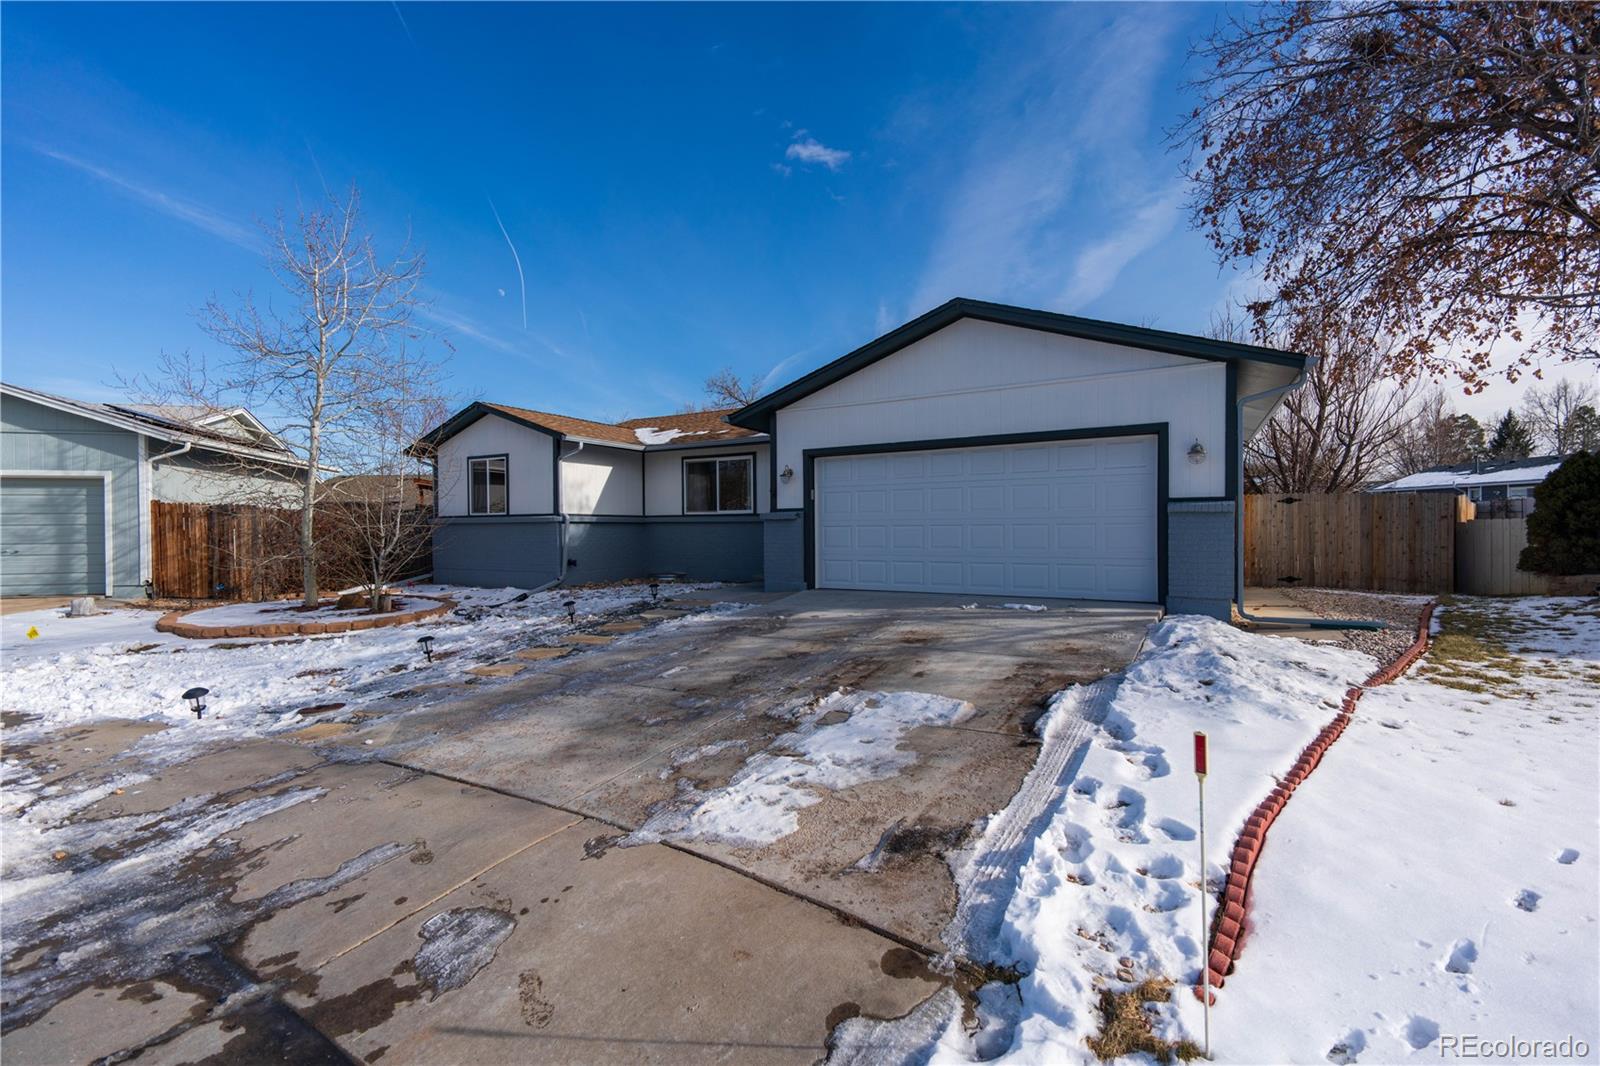 8802 w 86th avenue, arvada sold home. Closed on 2024-03-29 for $589,999.